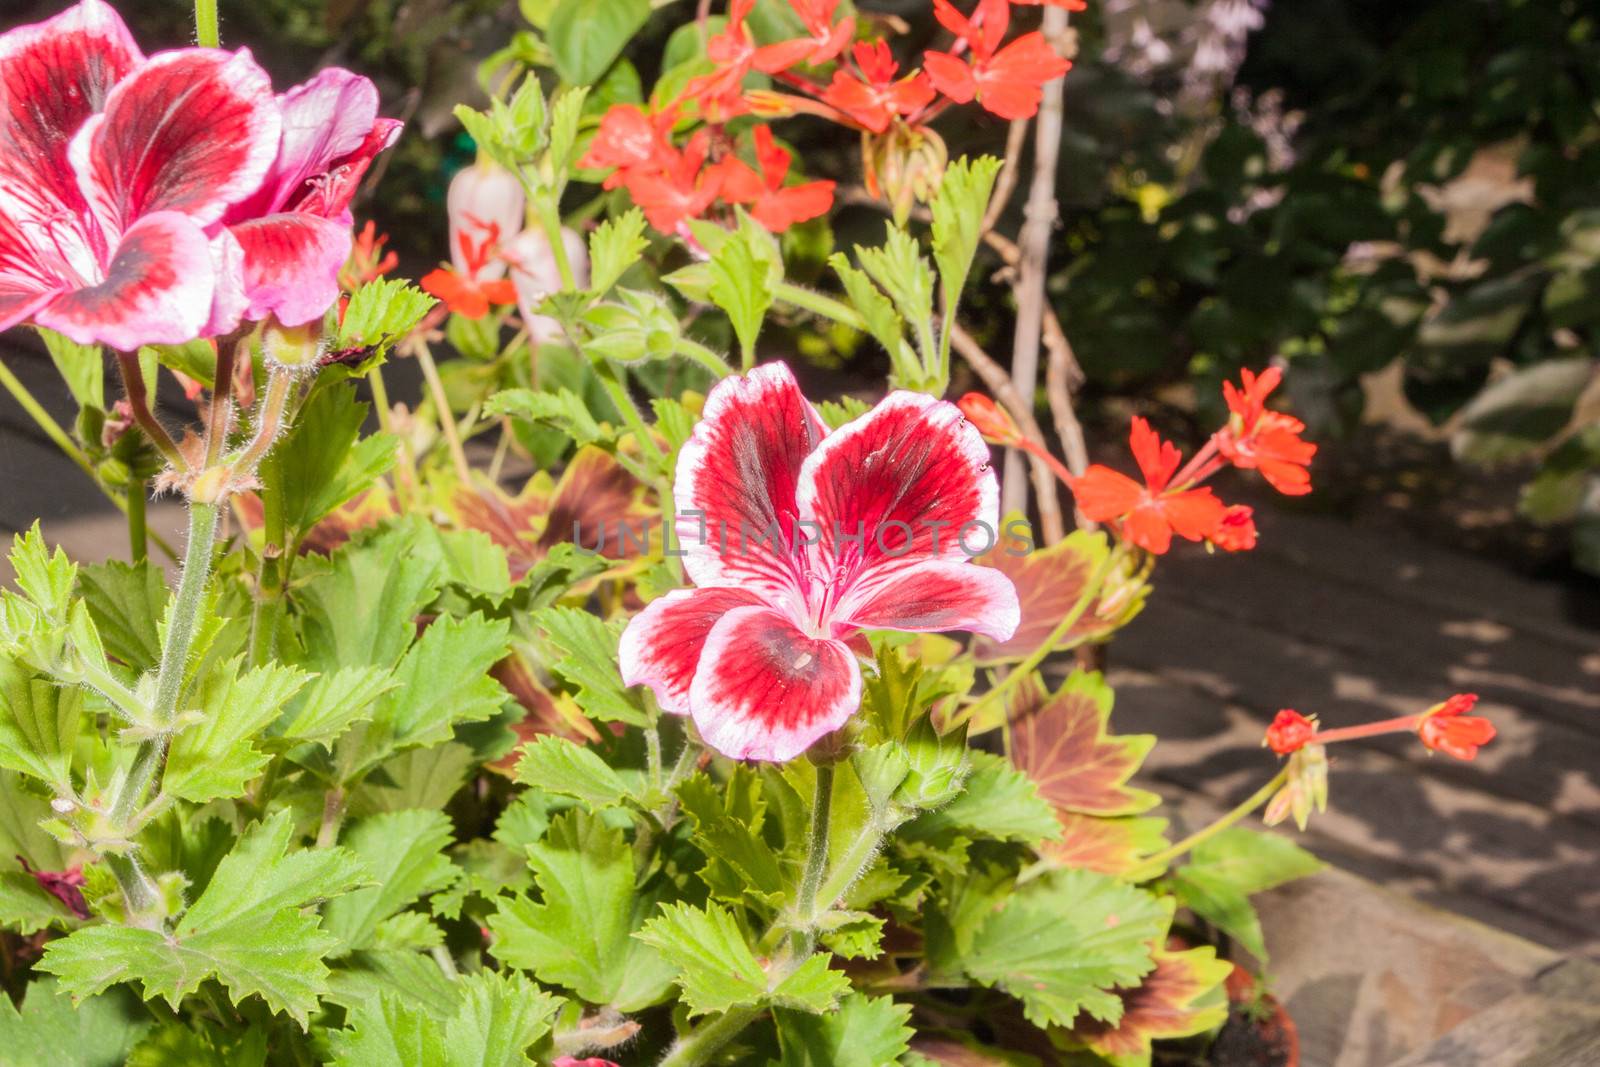 Pelargonium hortorum is a species of geranium most commonly used as an ornamental plant.